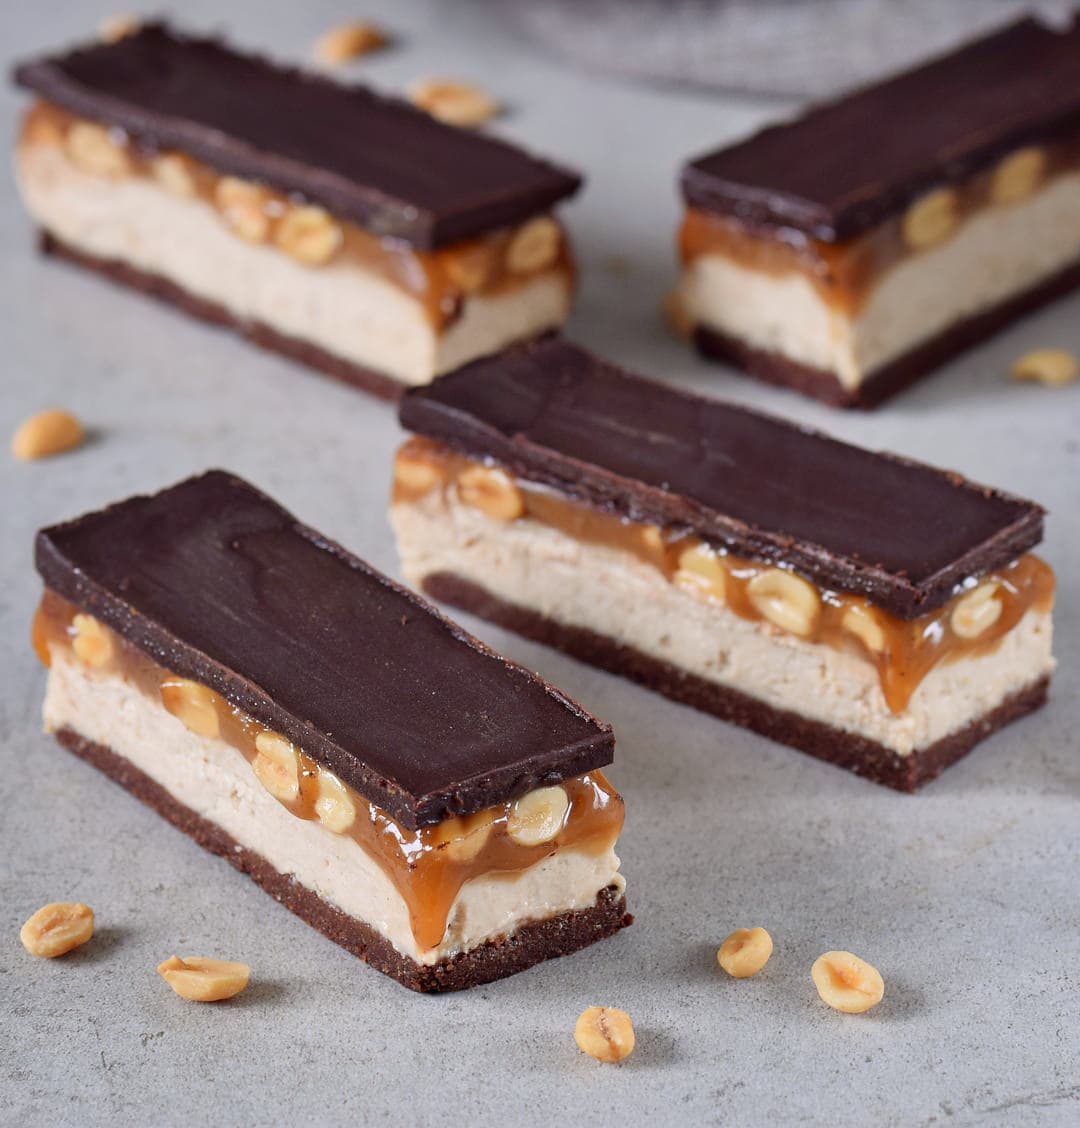 Gluten-free snickers bars with a brownie base, cashew cream, peanut caramel and dairy-free chocolate